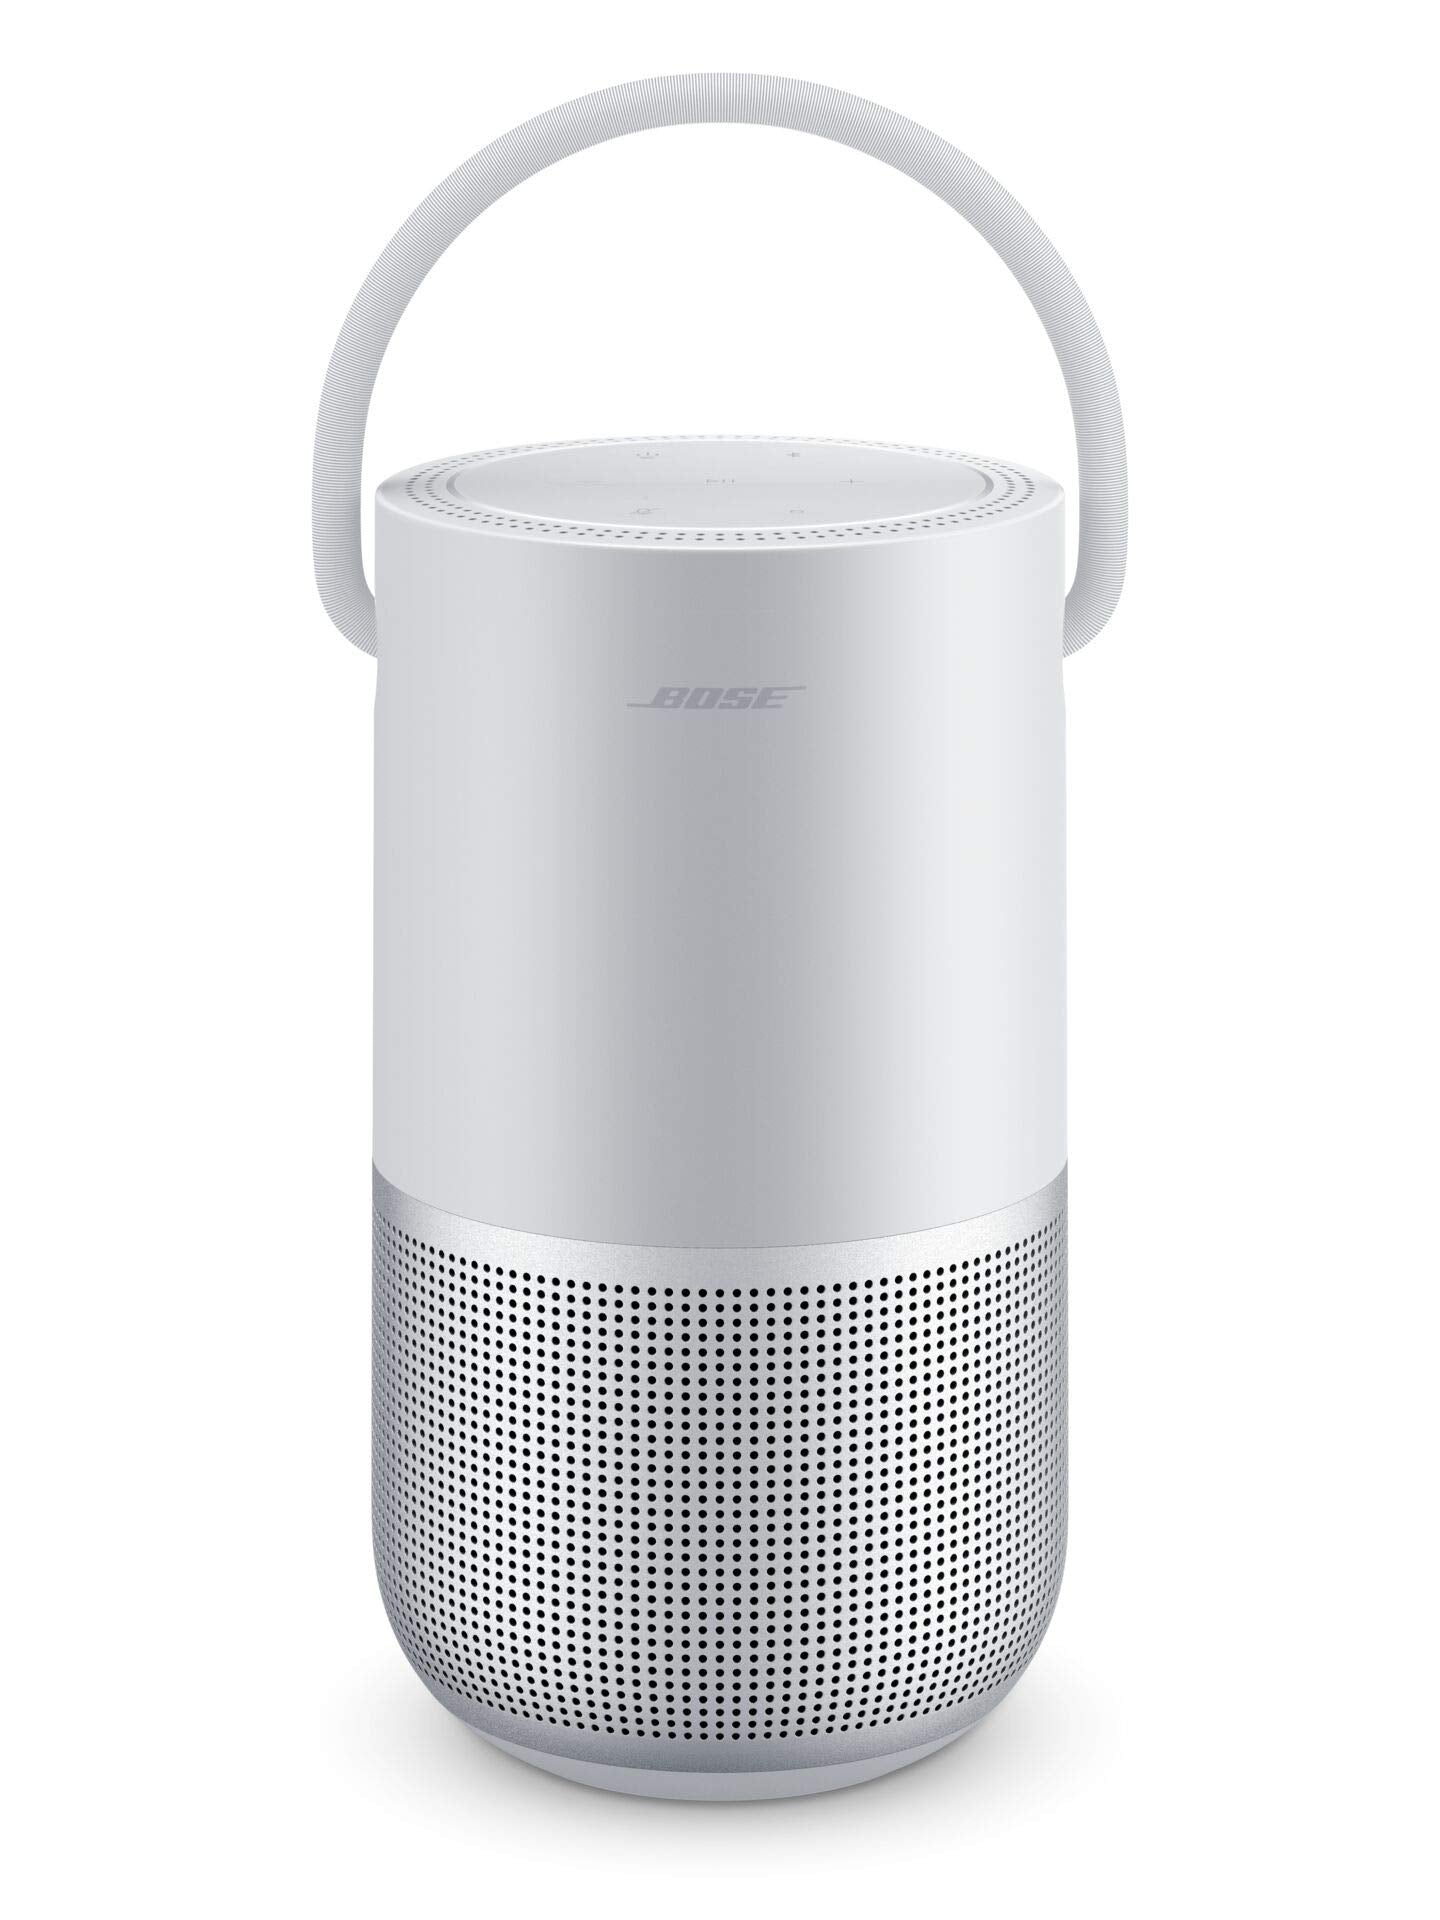 Bose Portable Home Speaker - Luxe Silver with Charging Cradle